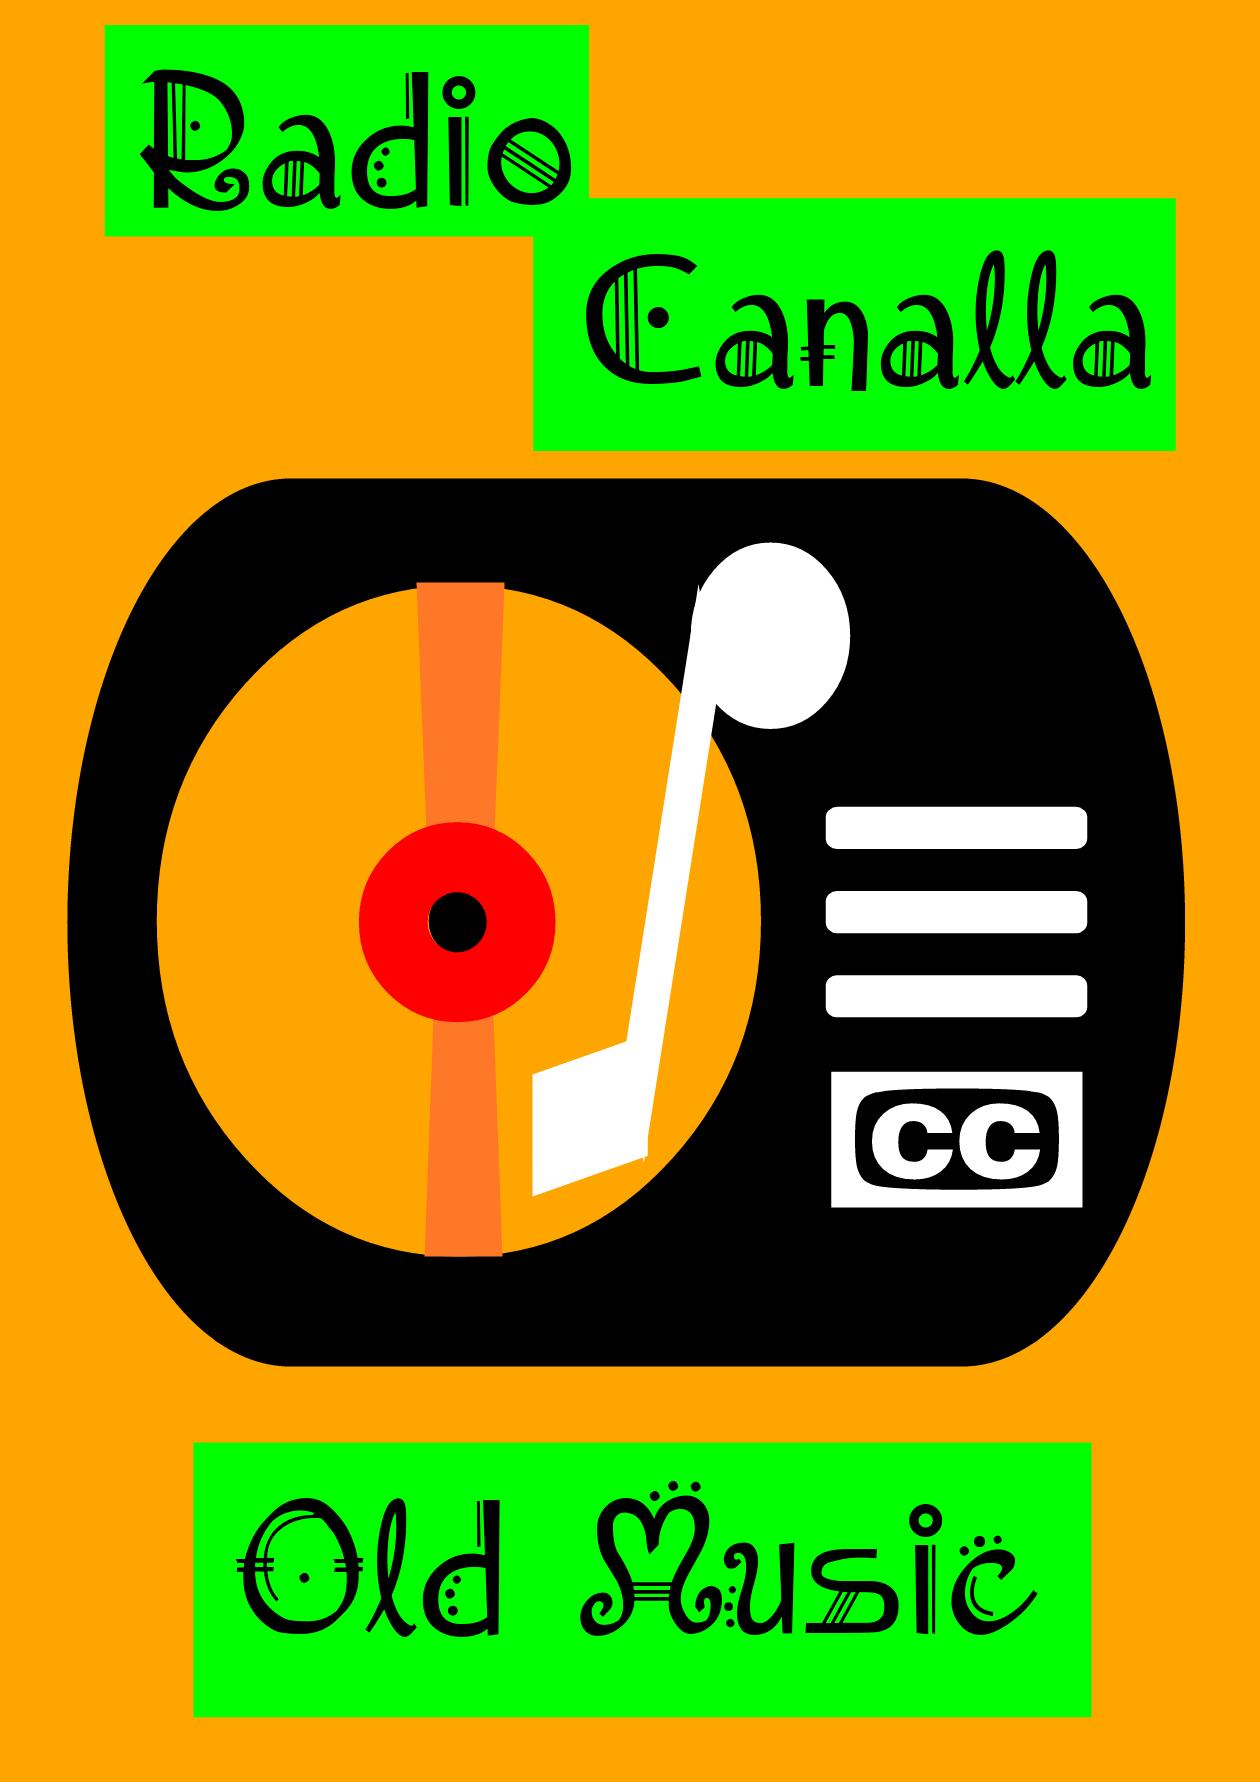 Radio Canalla Creative Commons for Android - APK Download